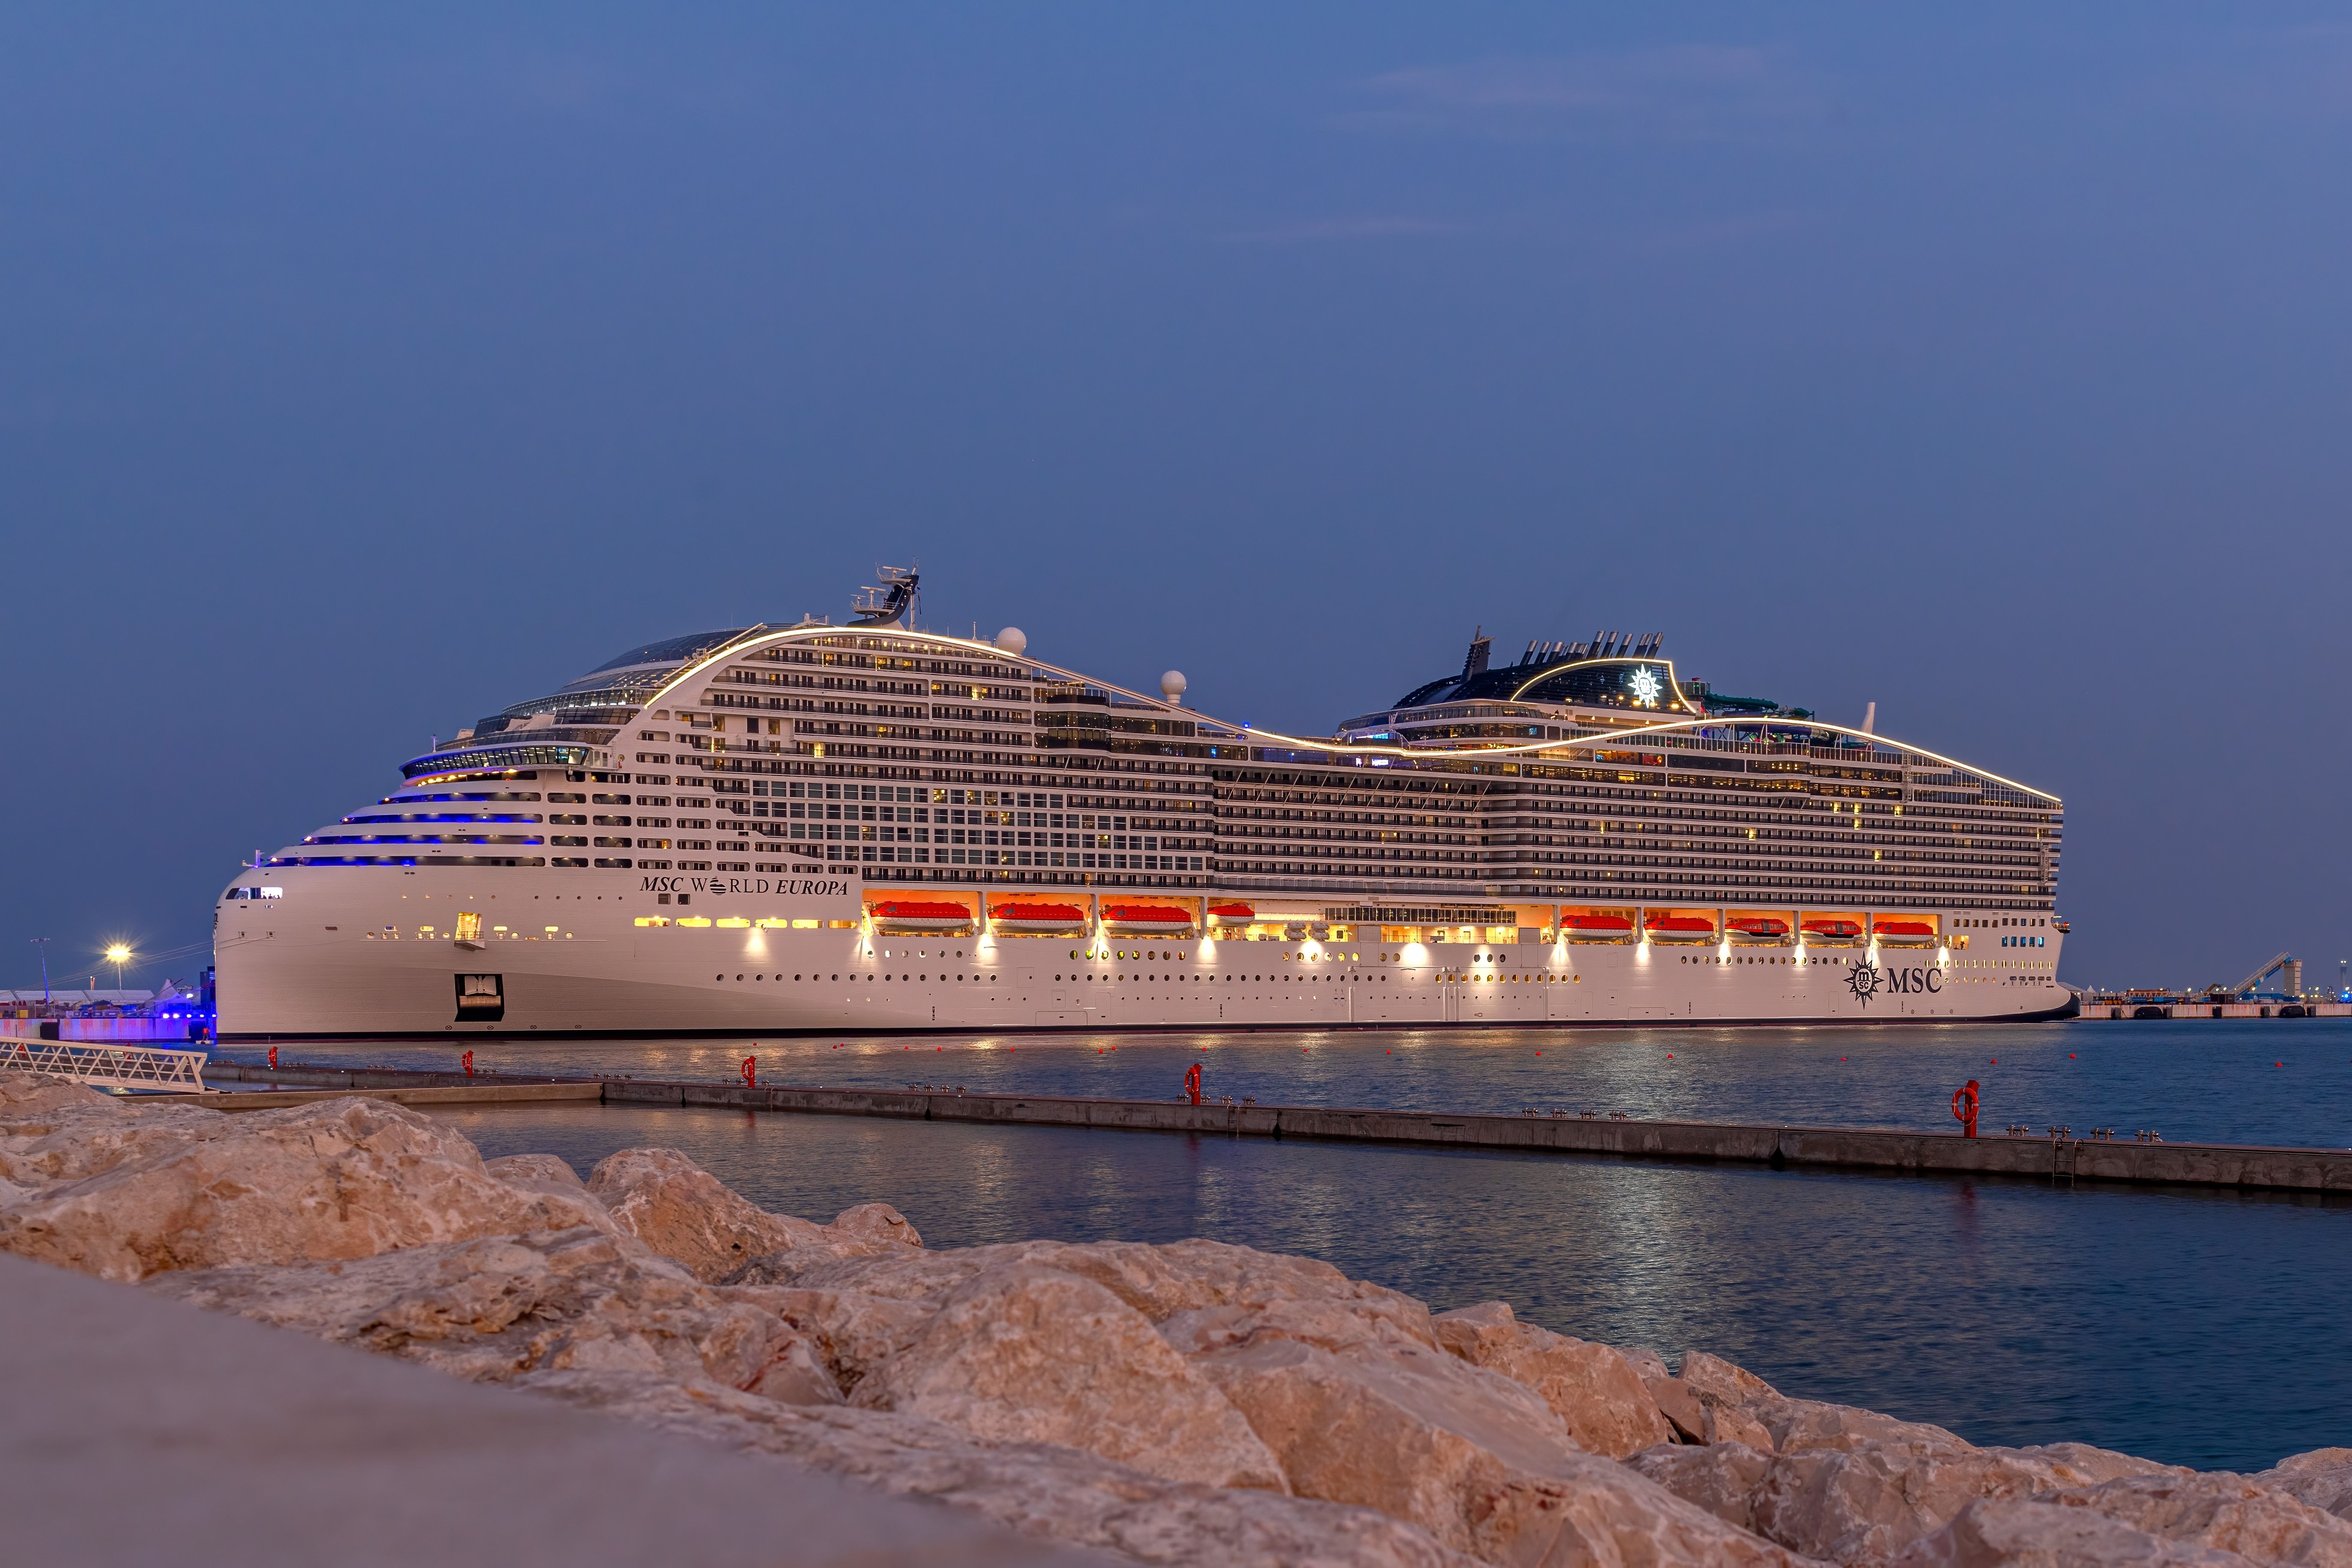 MSC World Europa sails in Doha, Qatar to receive World Cup guests